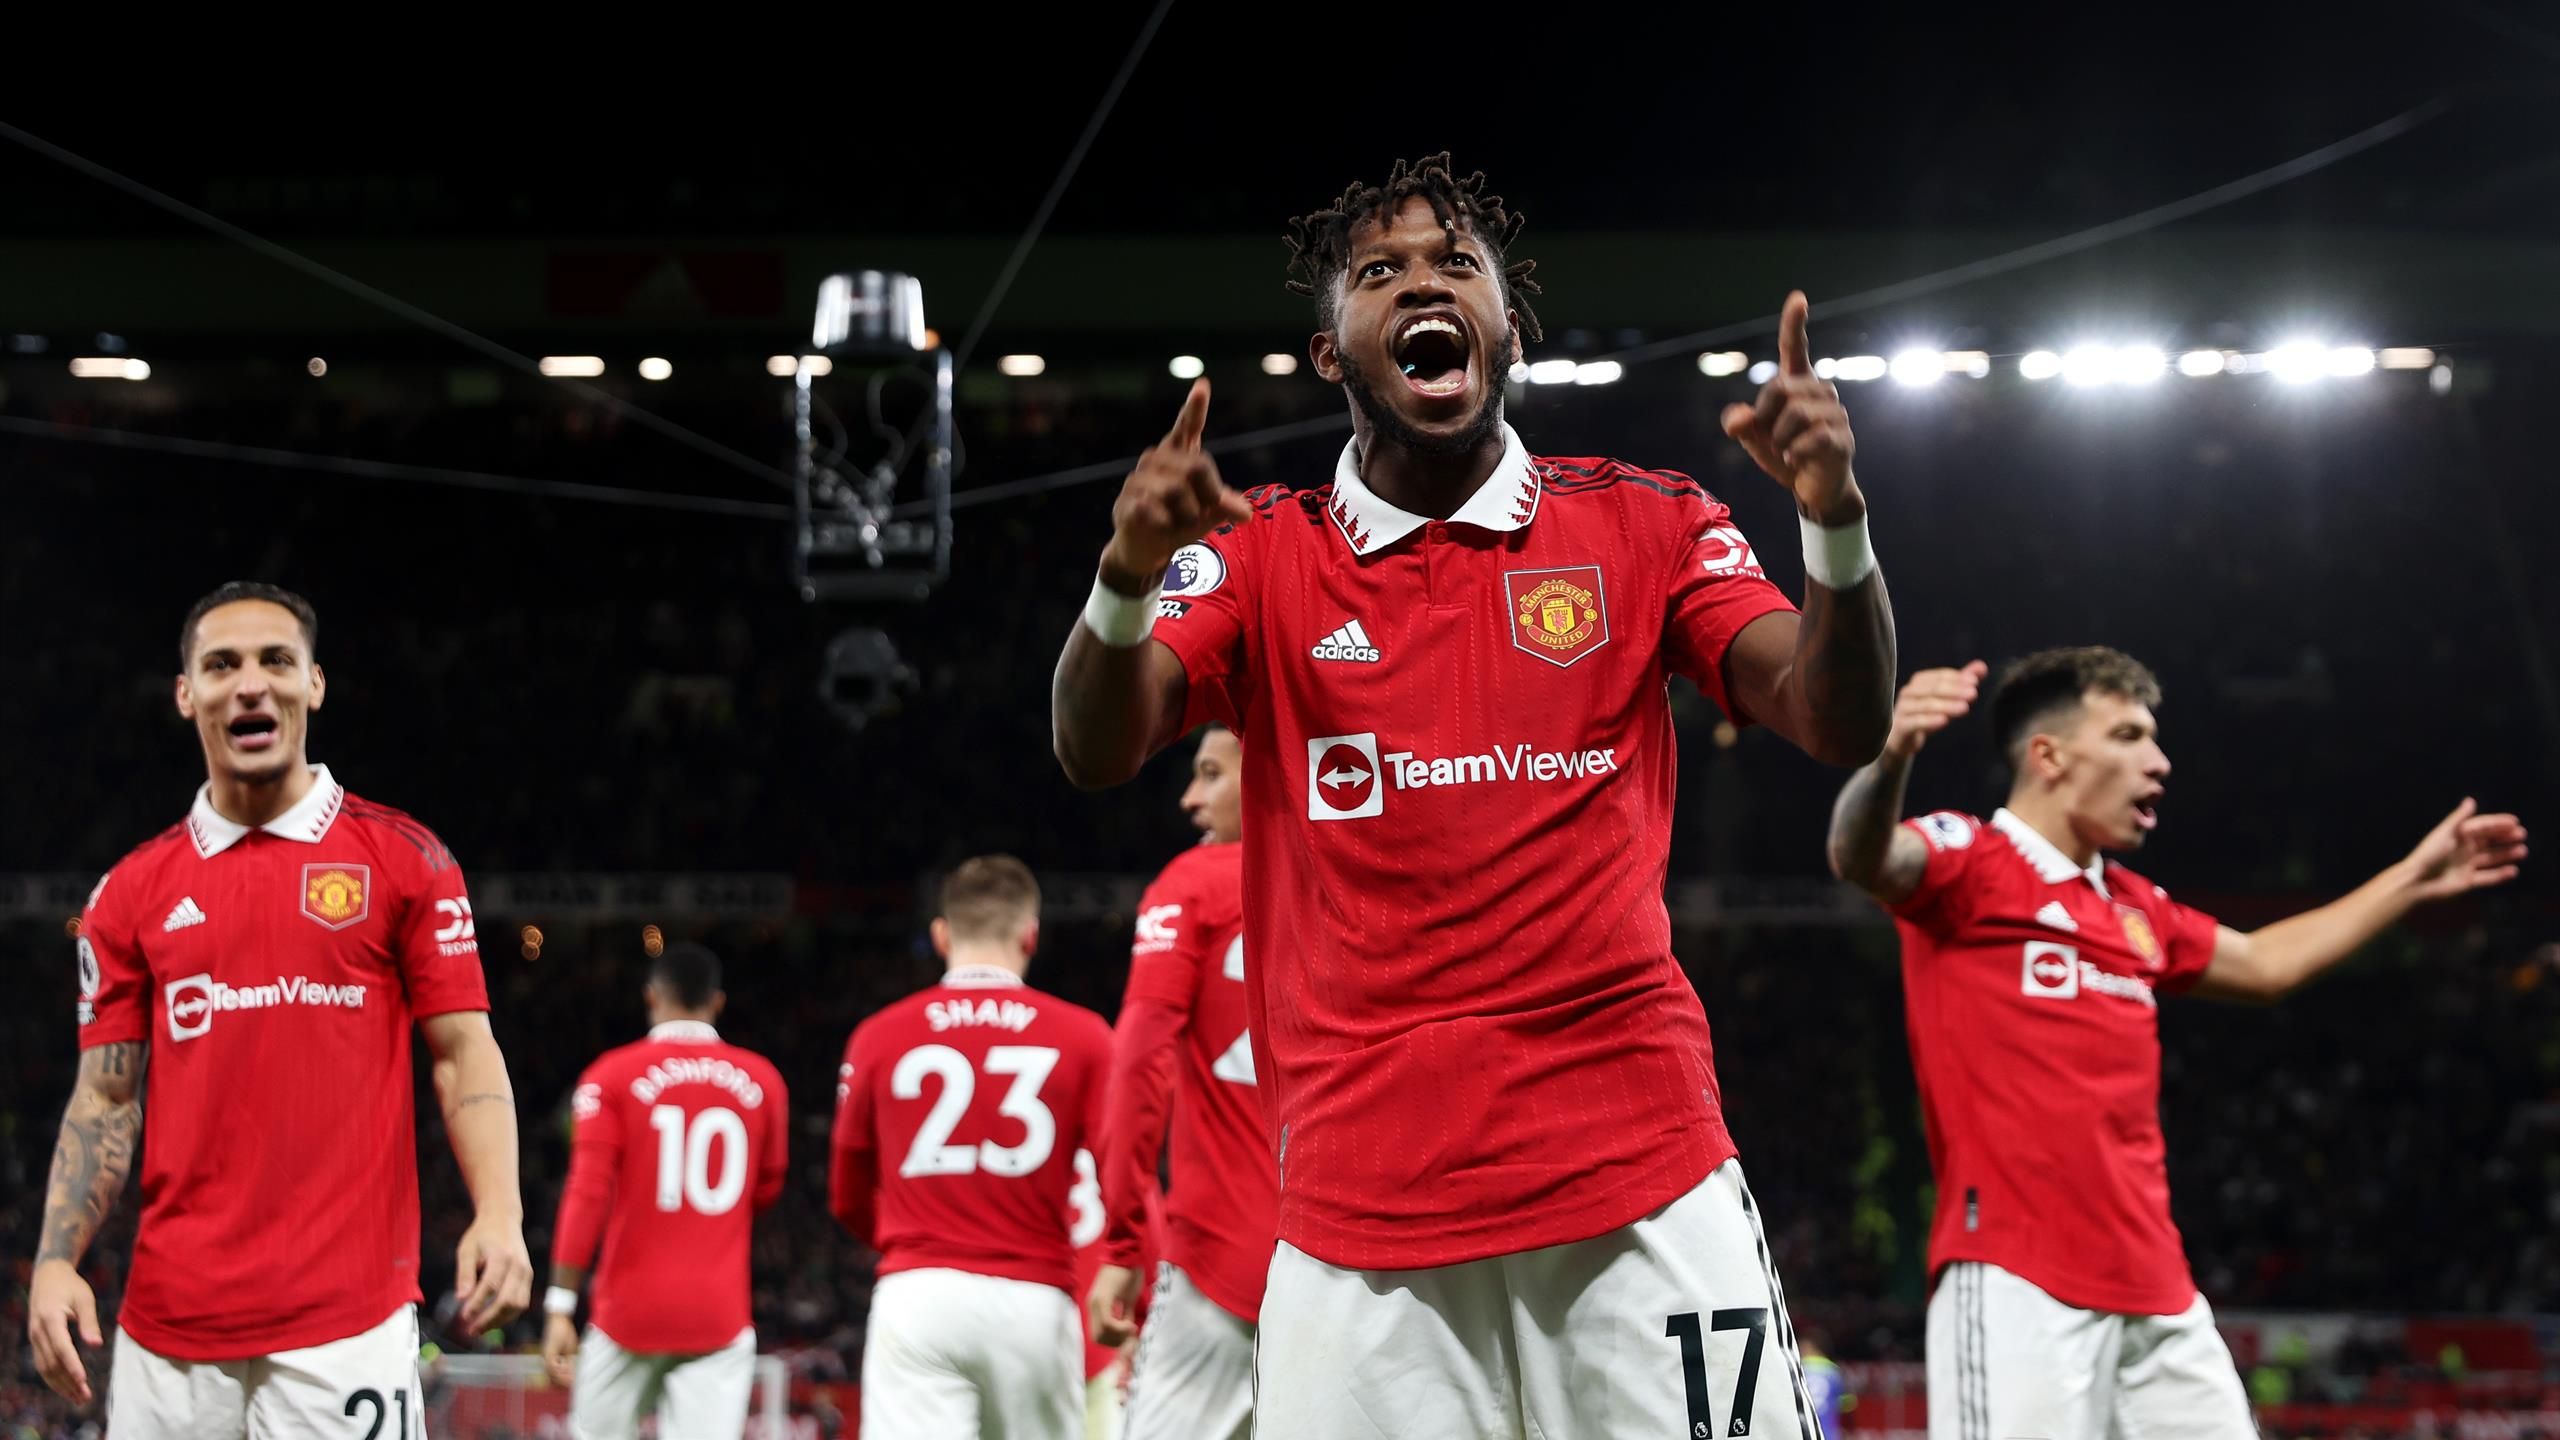 Manchester United 2 0 Tottenham: Fred And Bruno Fernandes Score As Utd Beat Tame Spurs At Old Trafford